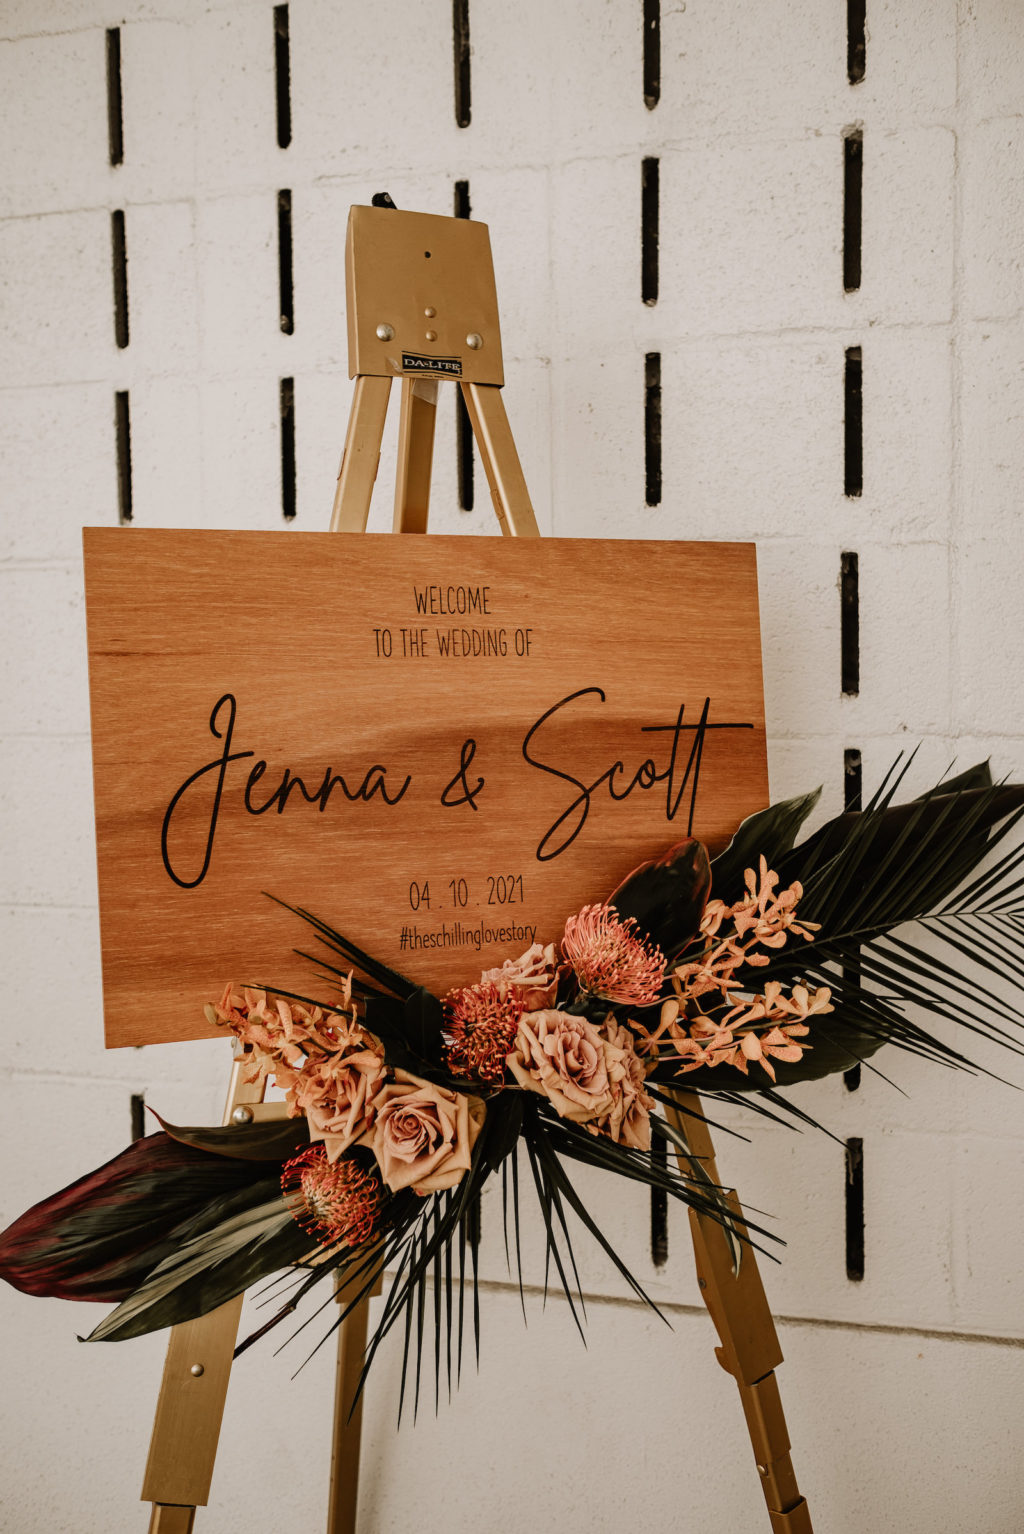 Tropical Elegant Wedding Ceremony Decor, Wooden Welcome Sign, Palm Fronds and Leaves, Pin Cushion Flower, Dusty Rose Roses | Tampa Bay Wedding Florist Iza's Flowers